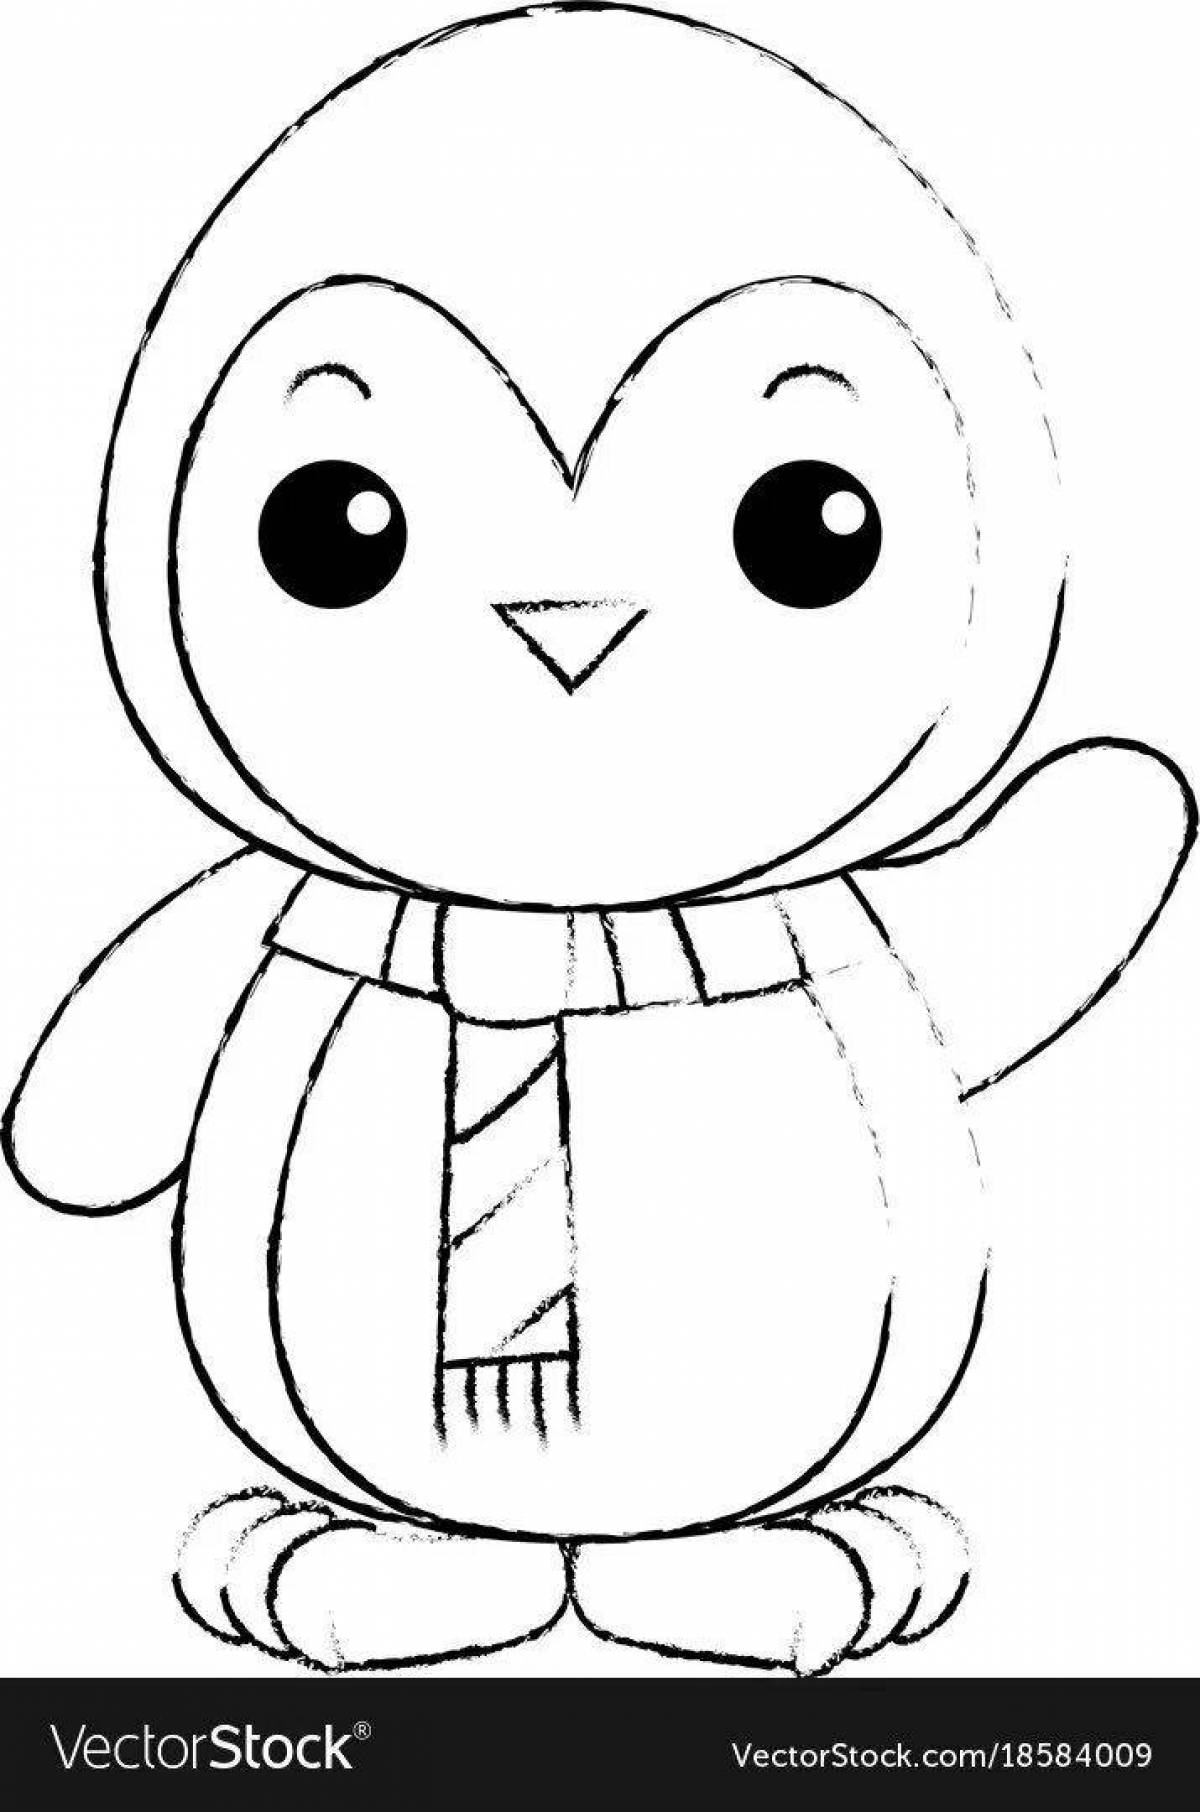 Cute and cuddly penguin coloring book